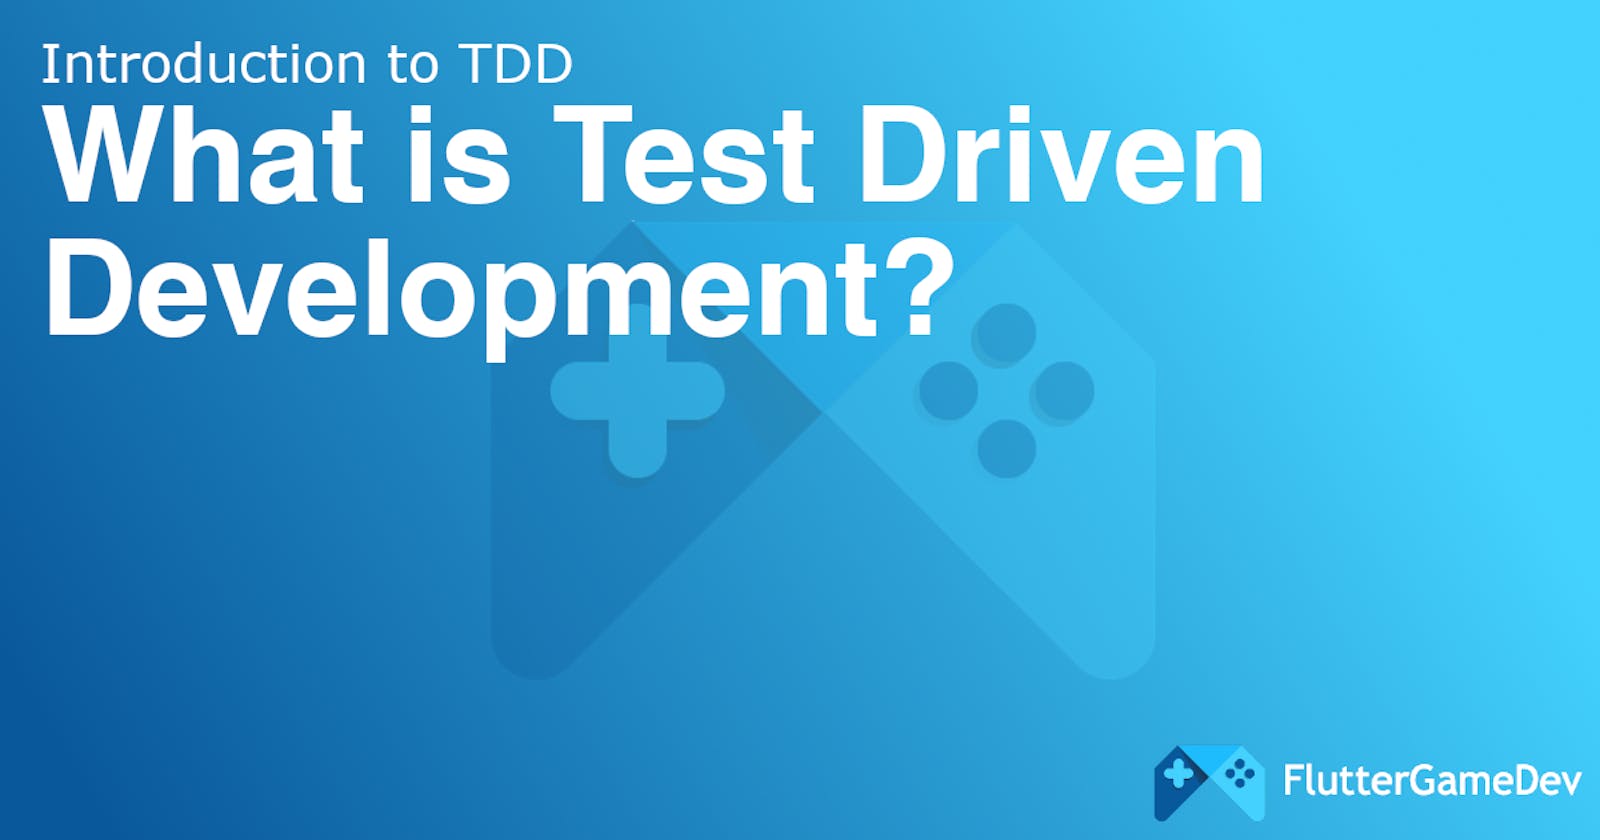 What is Test Driven Development?